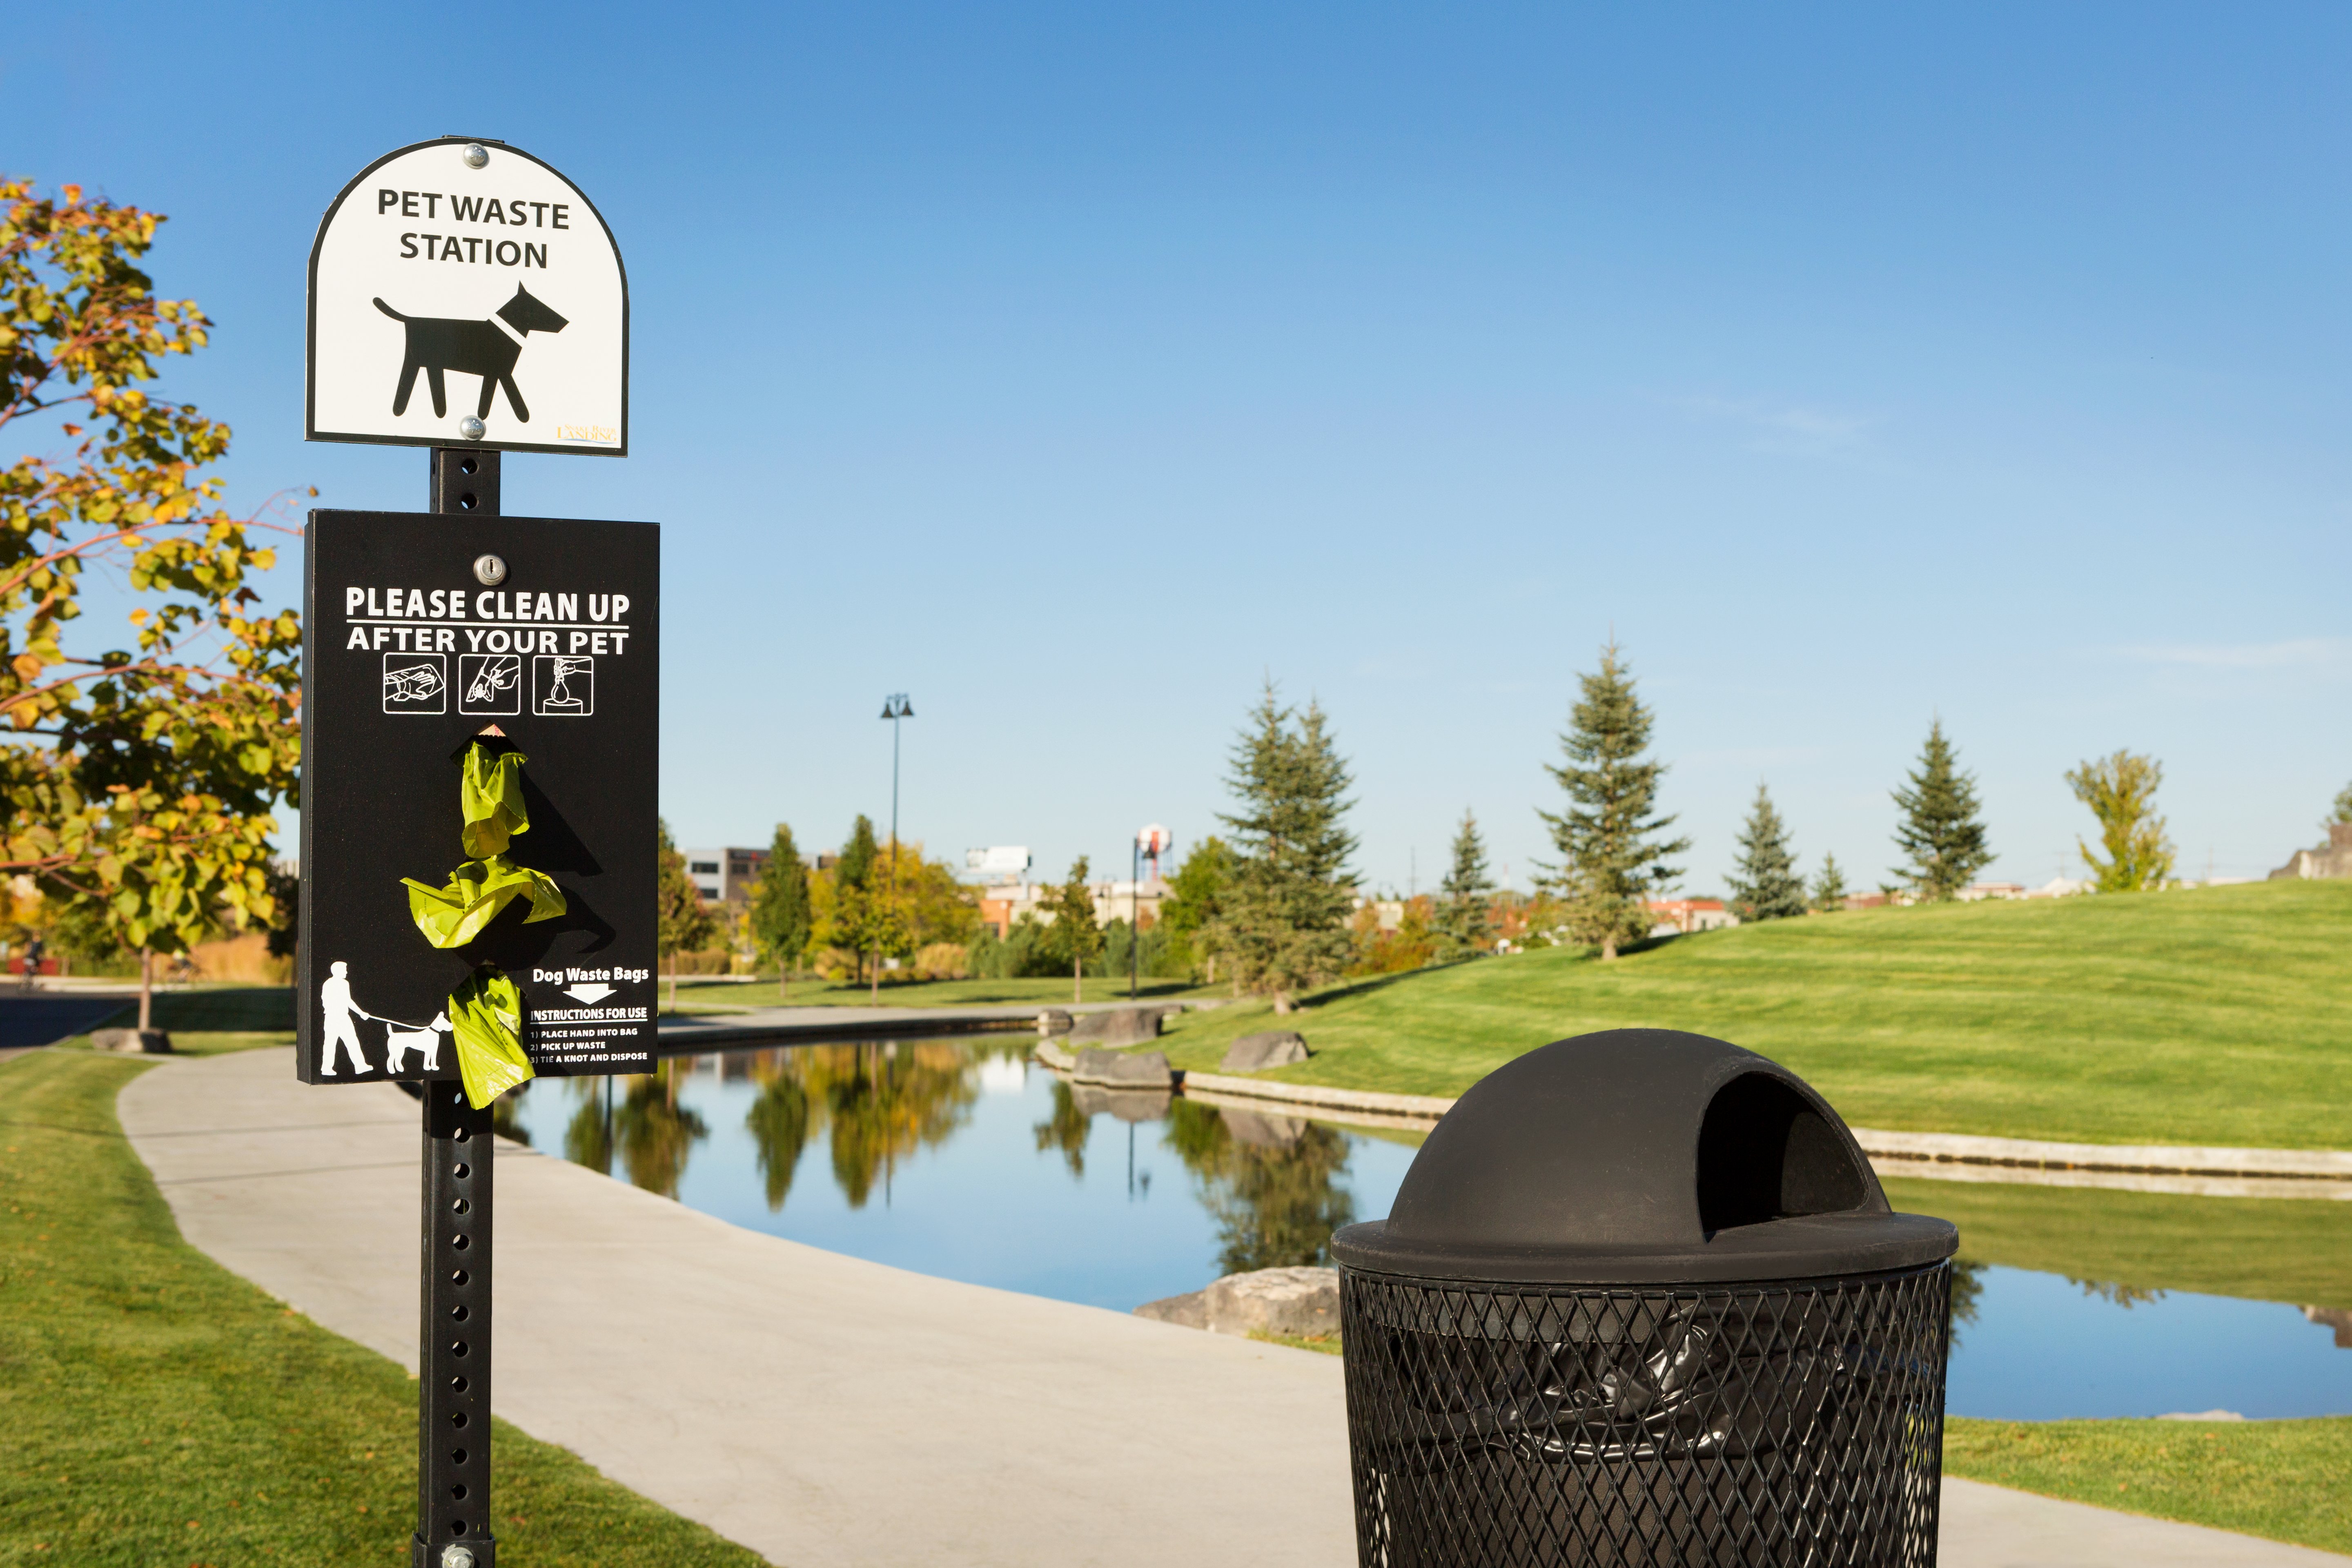 Pet Waste Station Sign, Waste Bag Dispenser, and Black Trash Can in Grassy Pet Area by Water